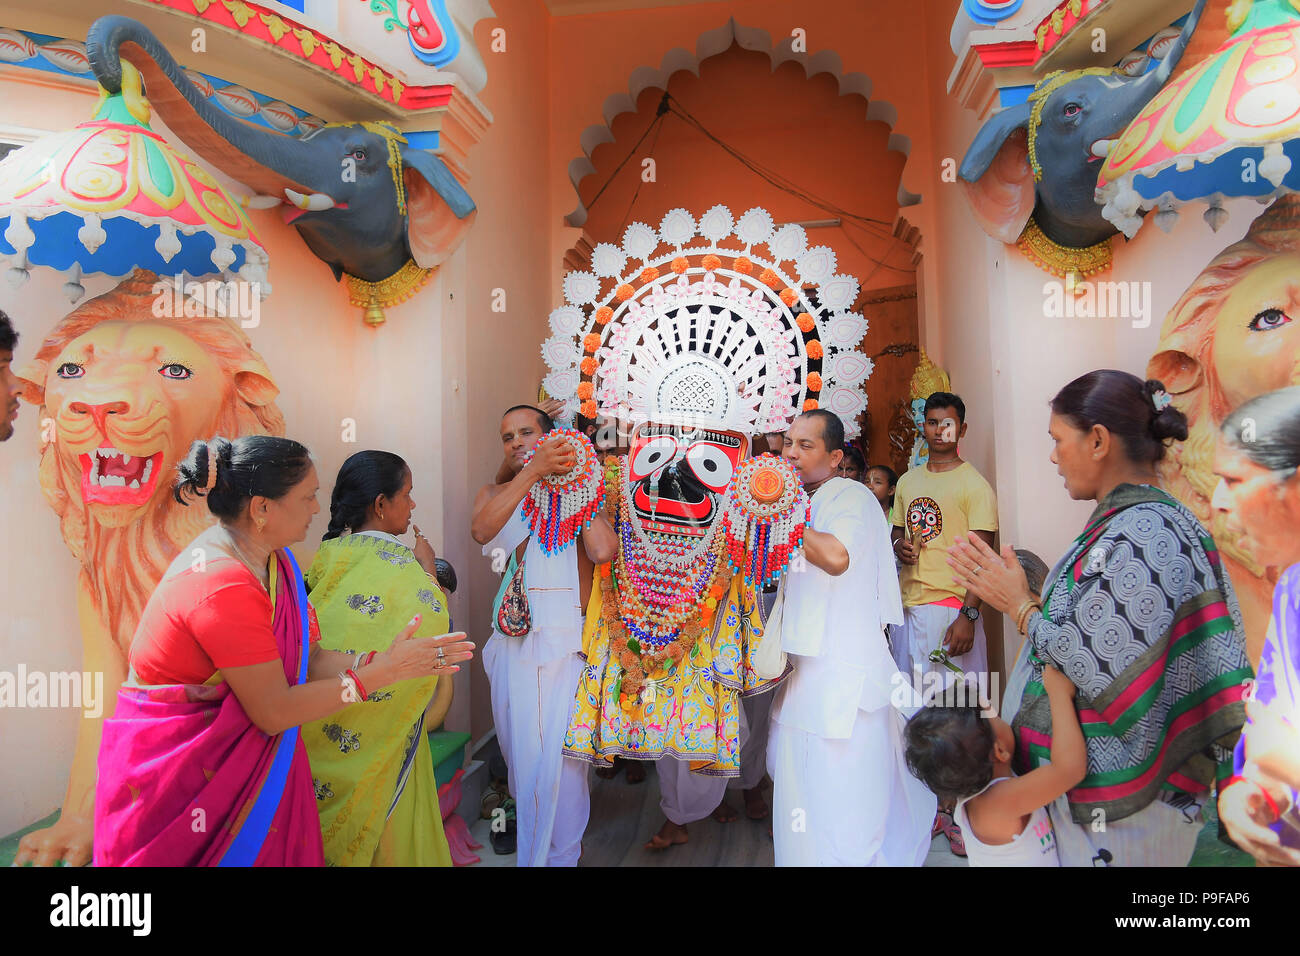 July 14, 2018 - Agartala, Tripura, India - Hindu priests seen carrying the idol during the celebration..Rath Yatra is an annual festival that involves devotees pulling a chariot of lord Jagannatha, his brother Balabhadra and sister Subhadra. (Credit Image: © Abhisek Saha/SOPA Images via ZUMA Wire) Stock Photo